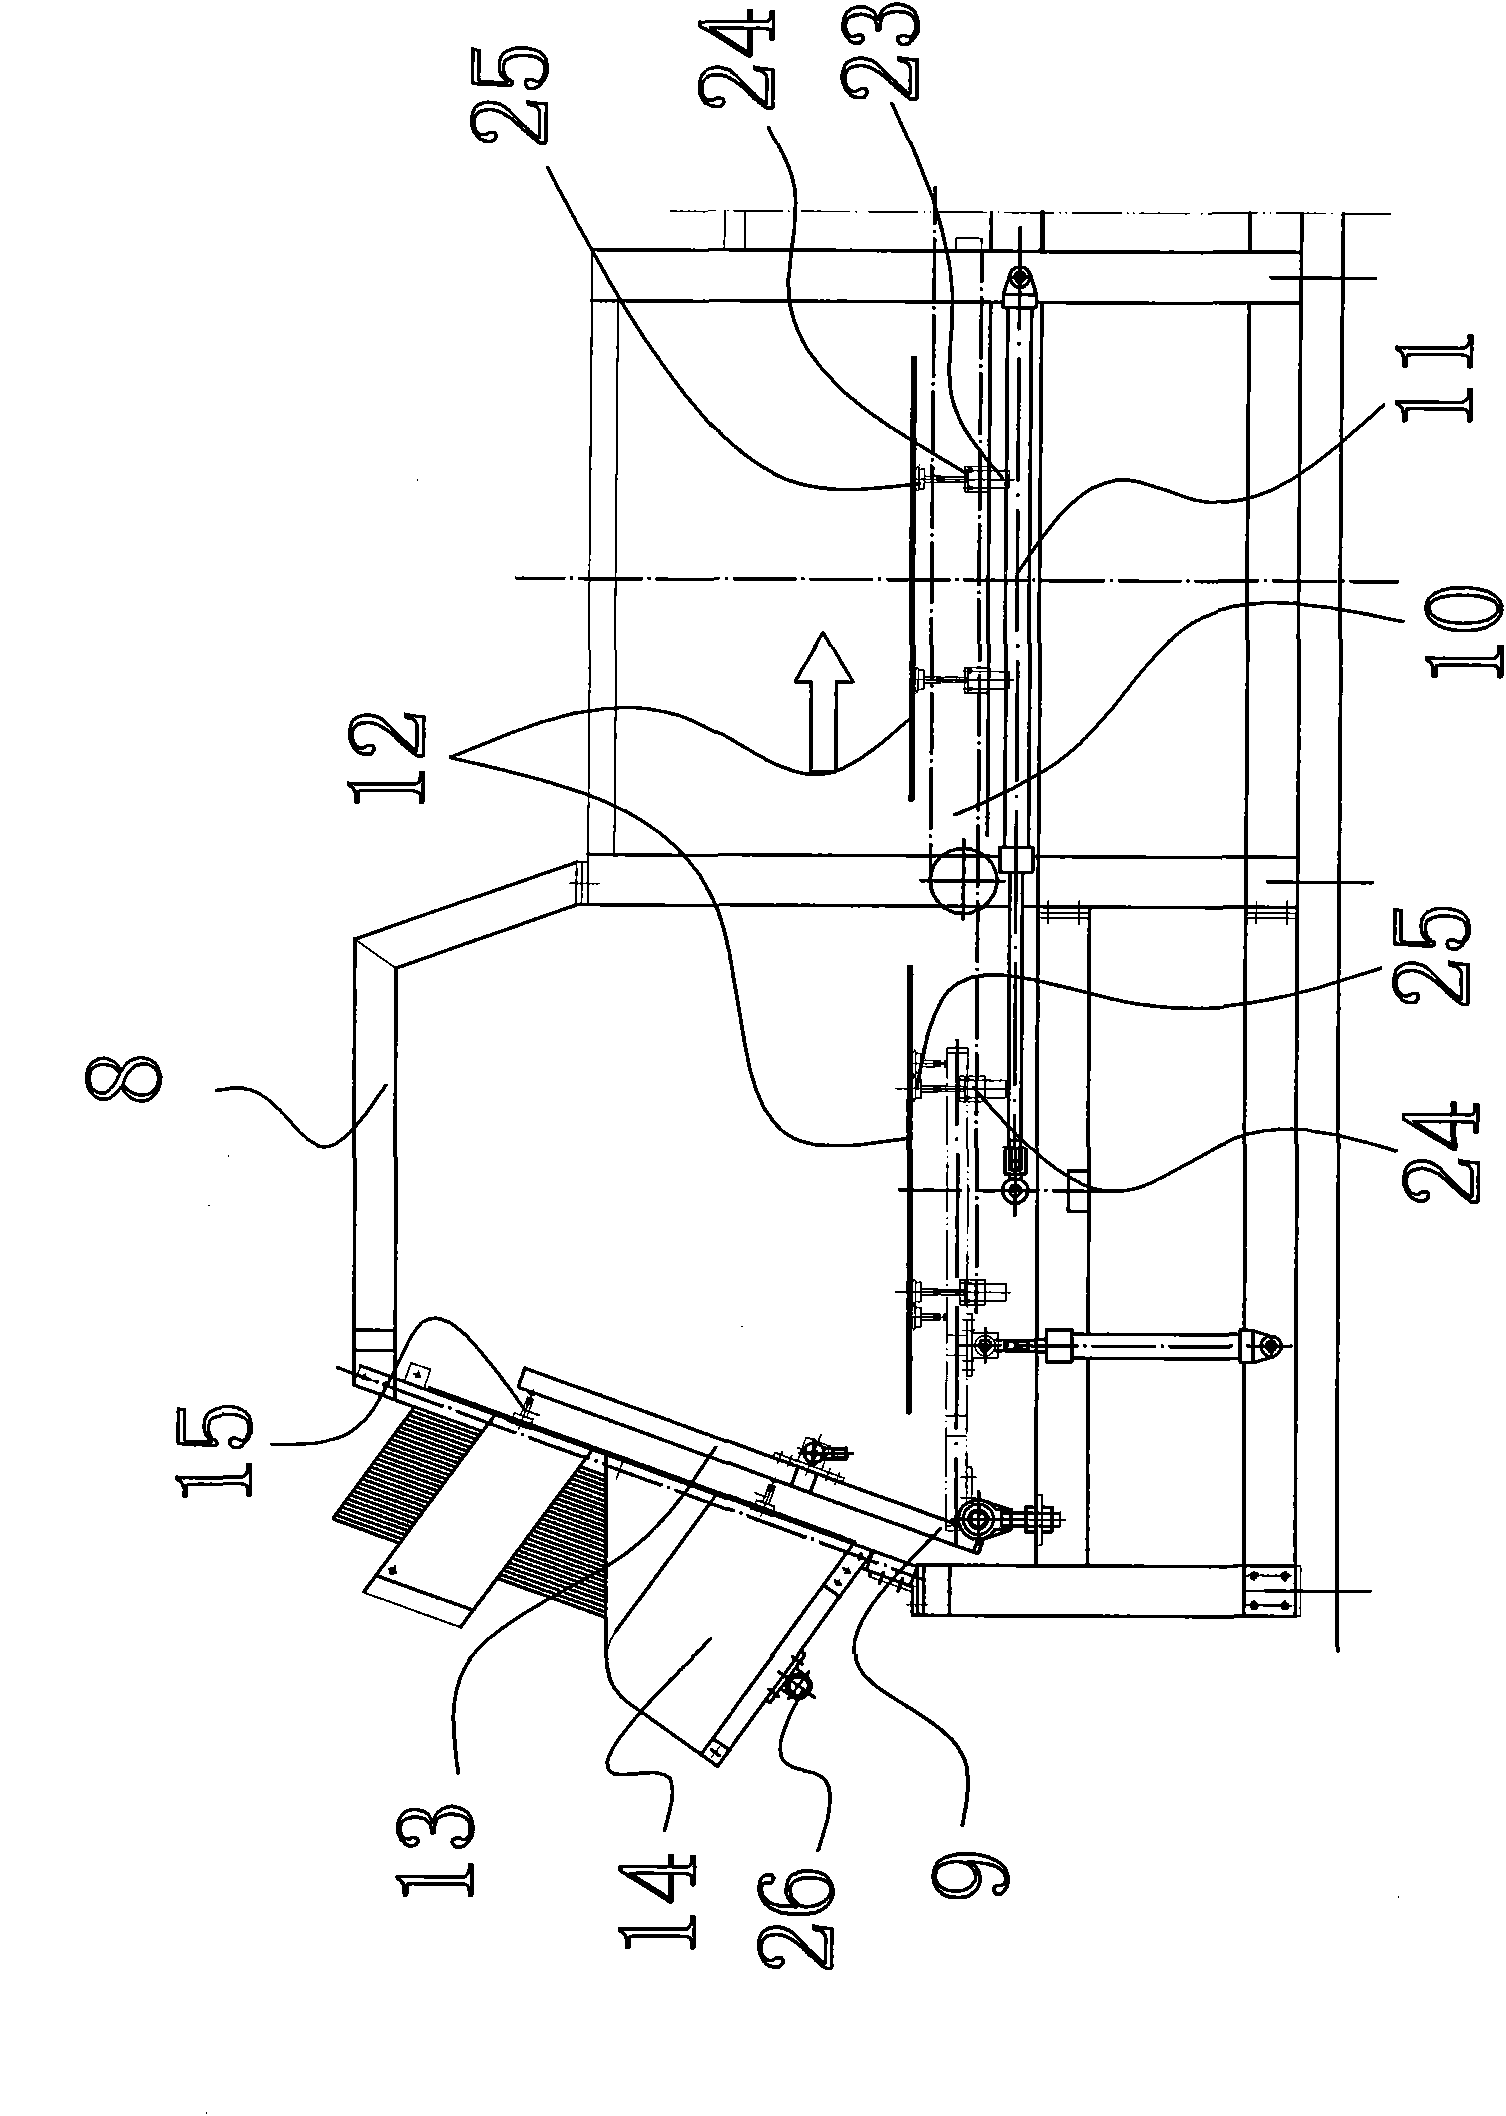 Tile-packaging method and apparatus